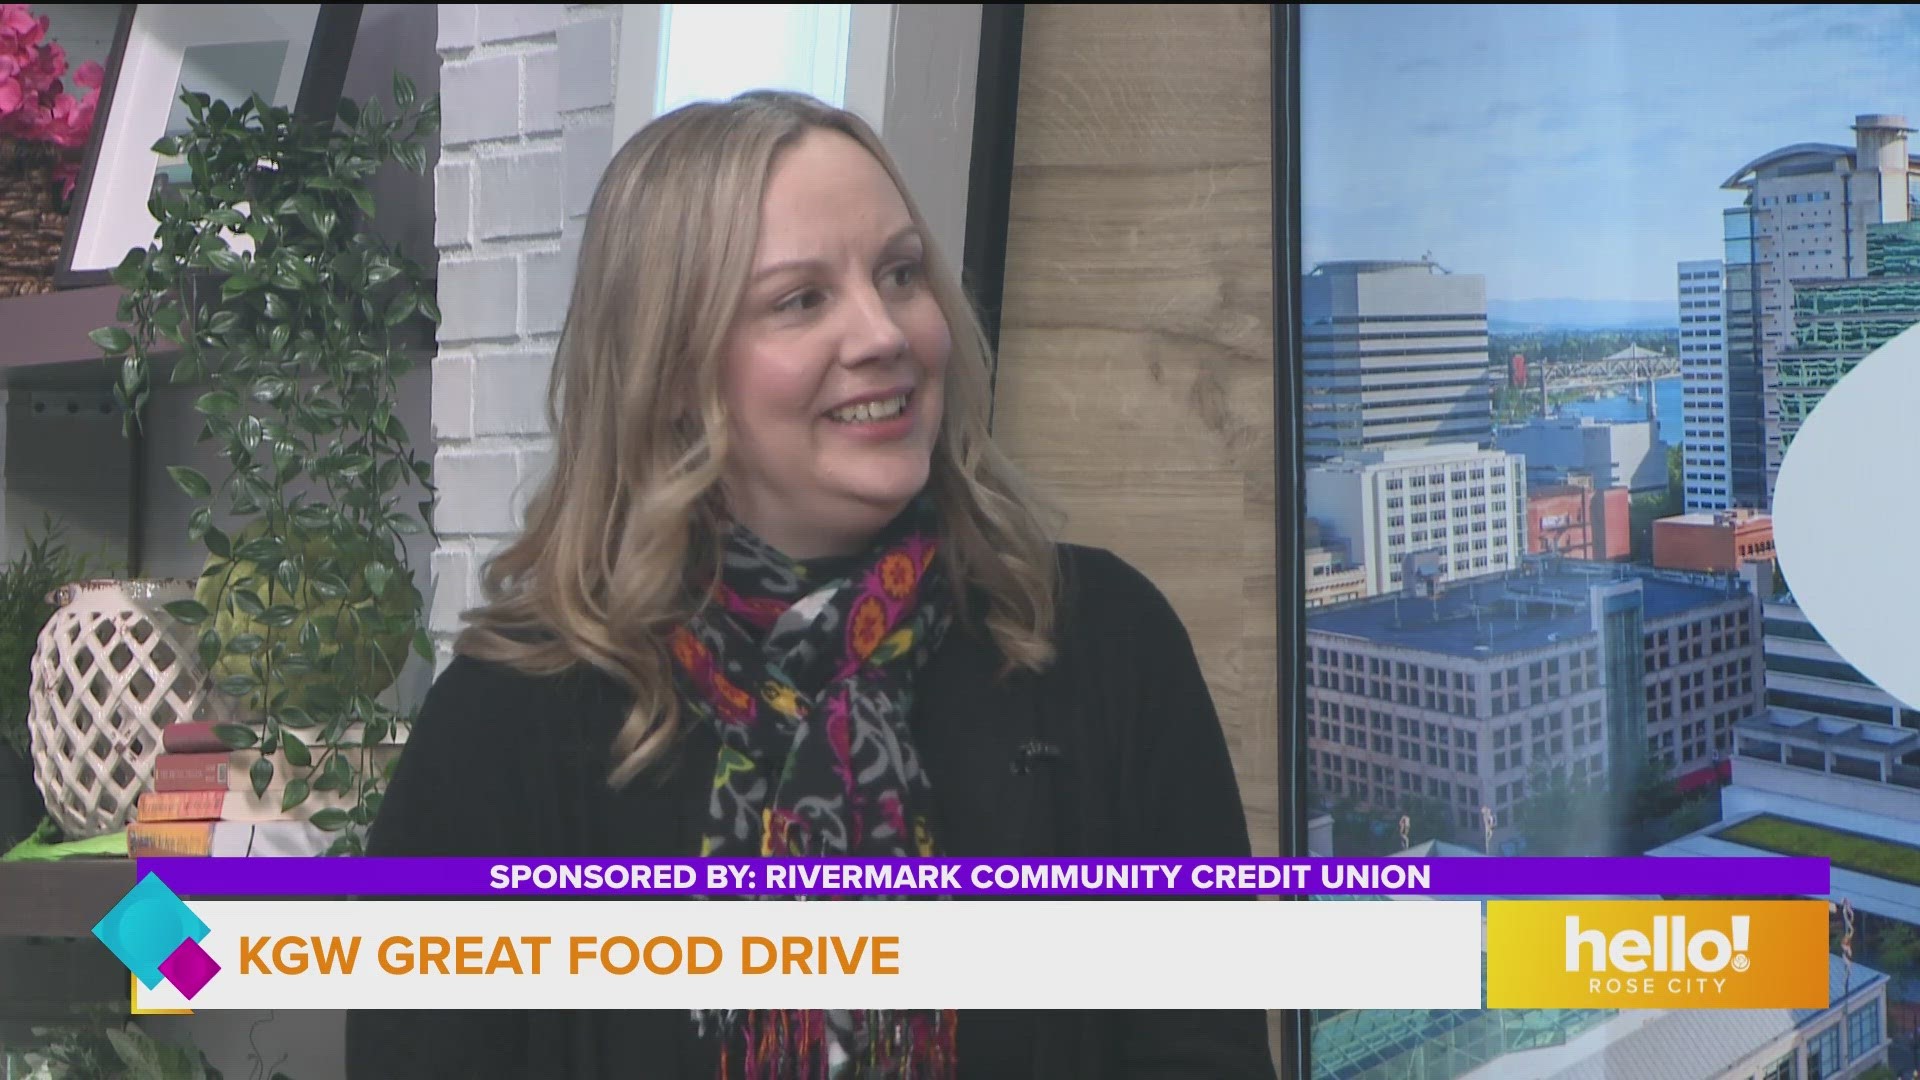 This segment is sponsored by Rivermark Community Credit Union